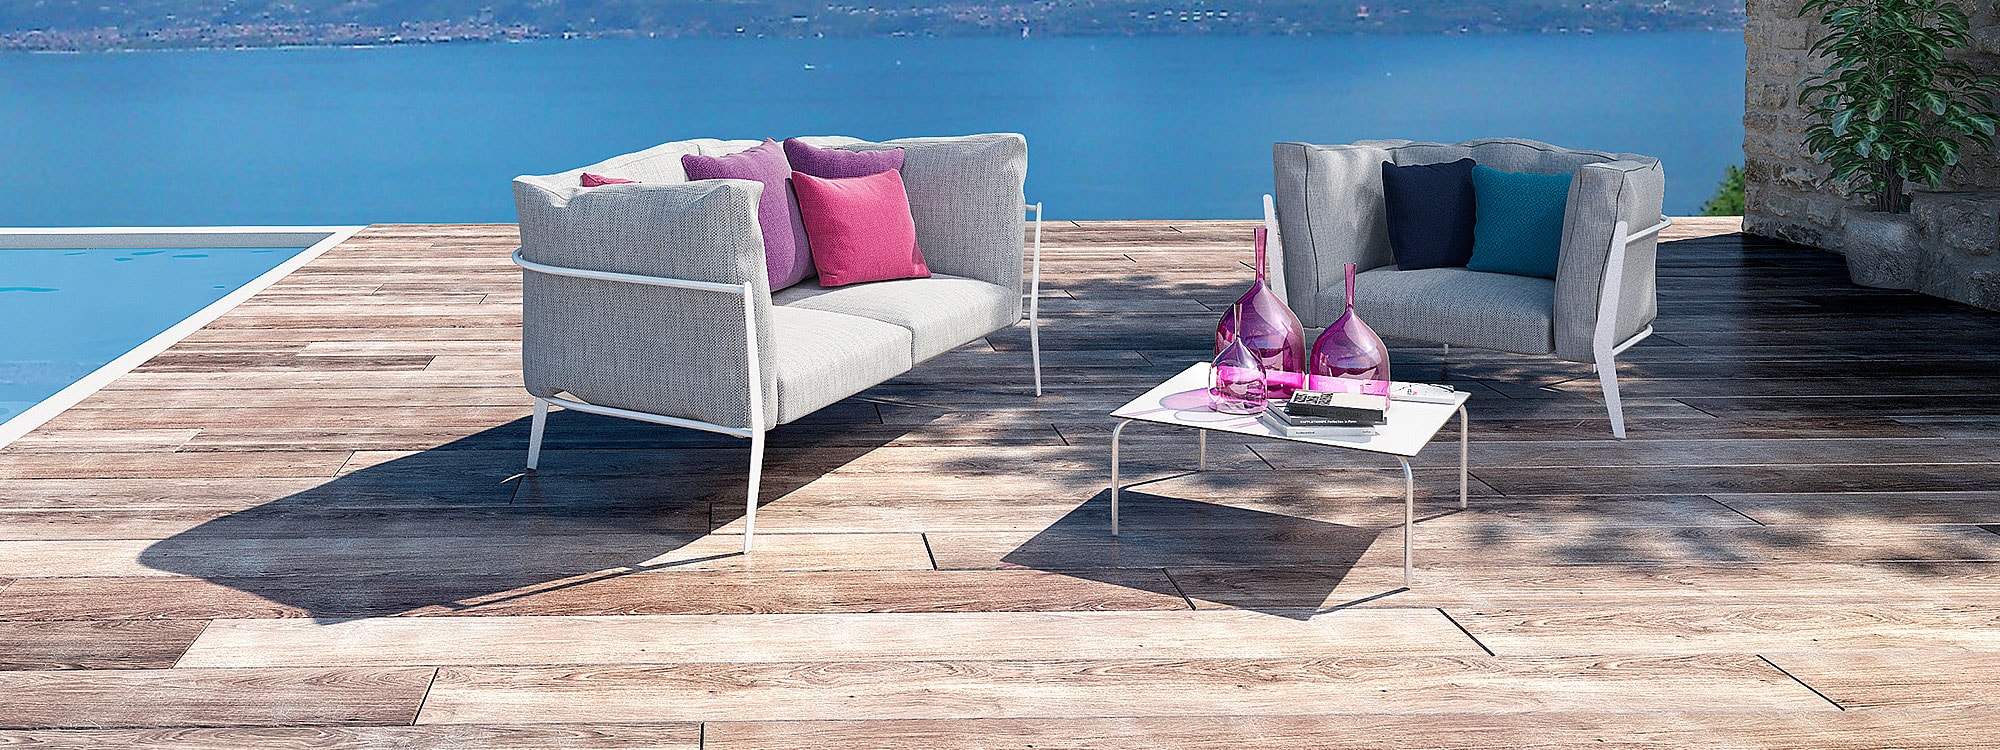 Image of Coro Clea modern garden sofa and lounge chair on wooden decked poolside, with large expanse of water in the background